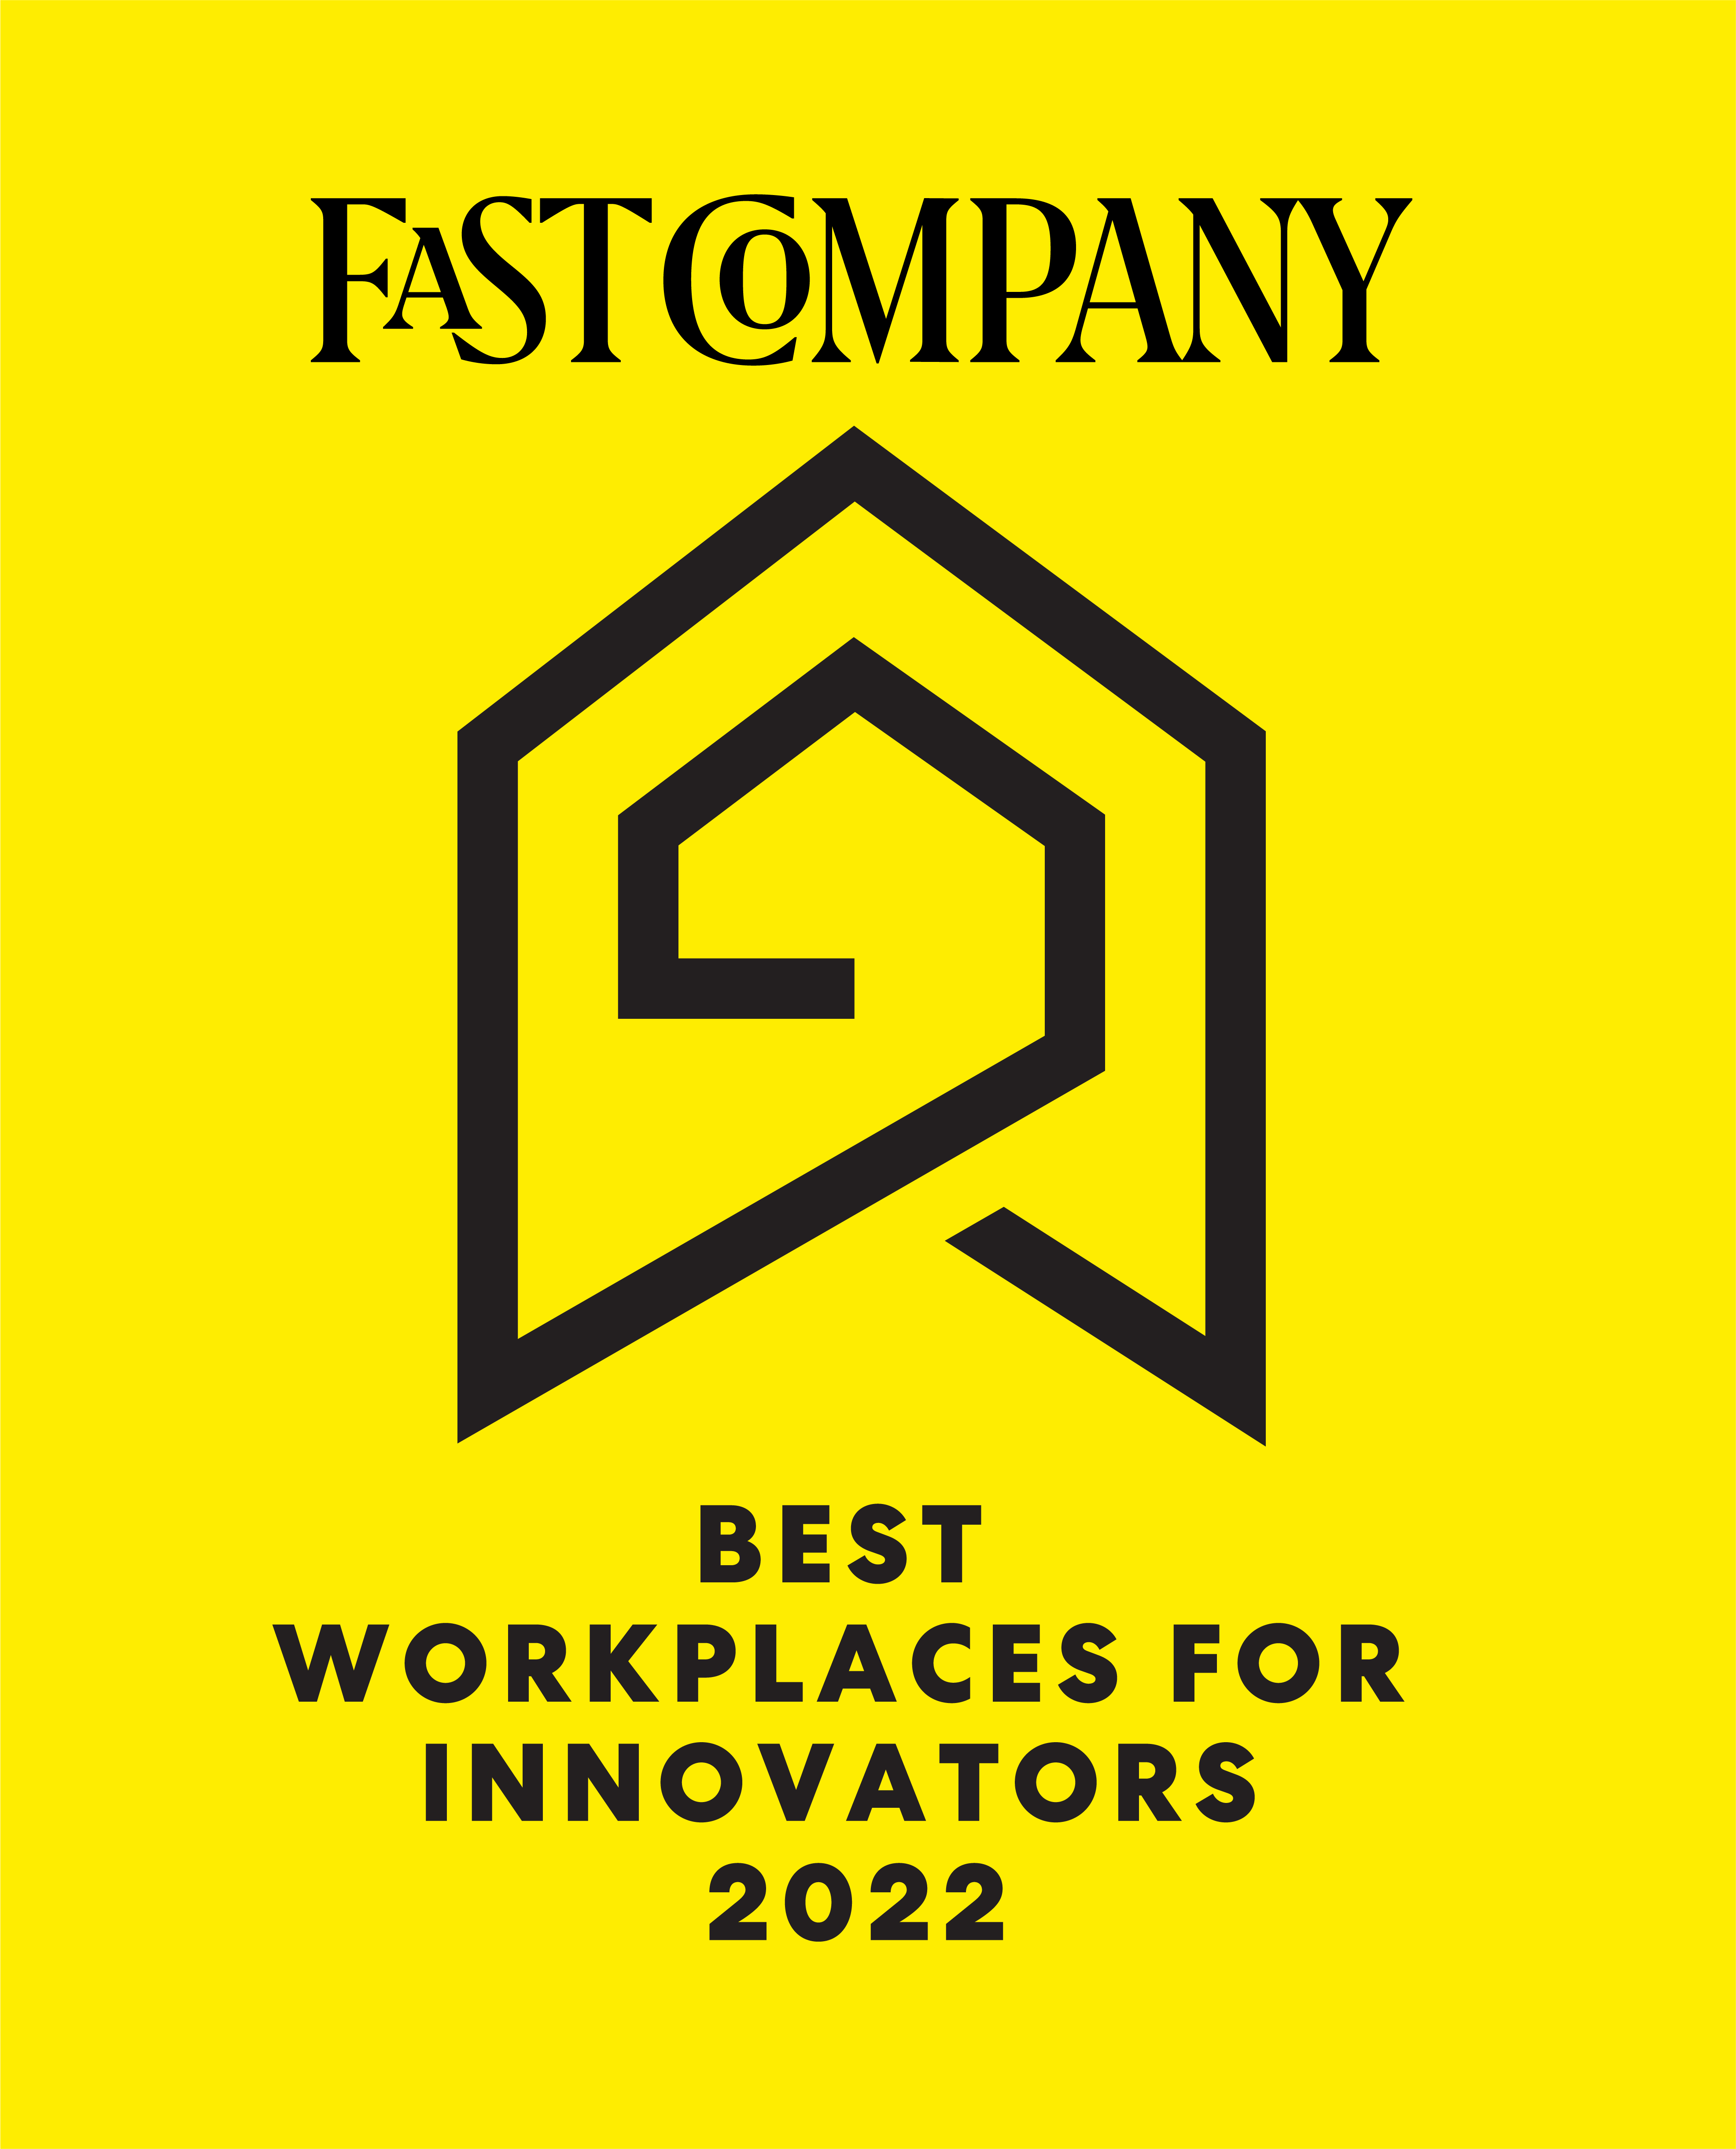 Fast Company's Best Place for Innovators Award